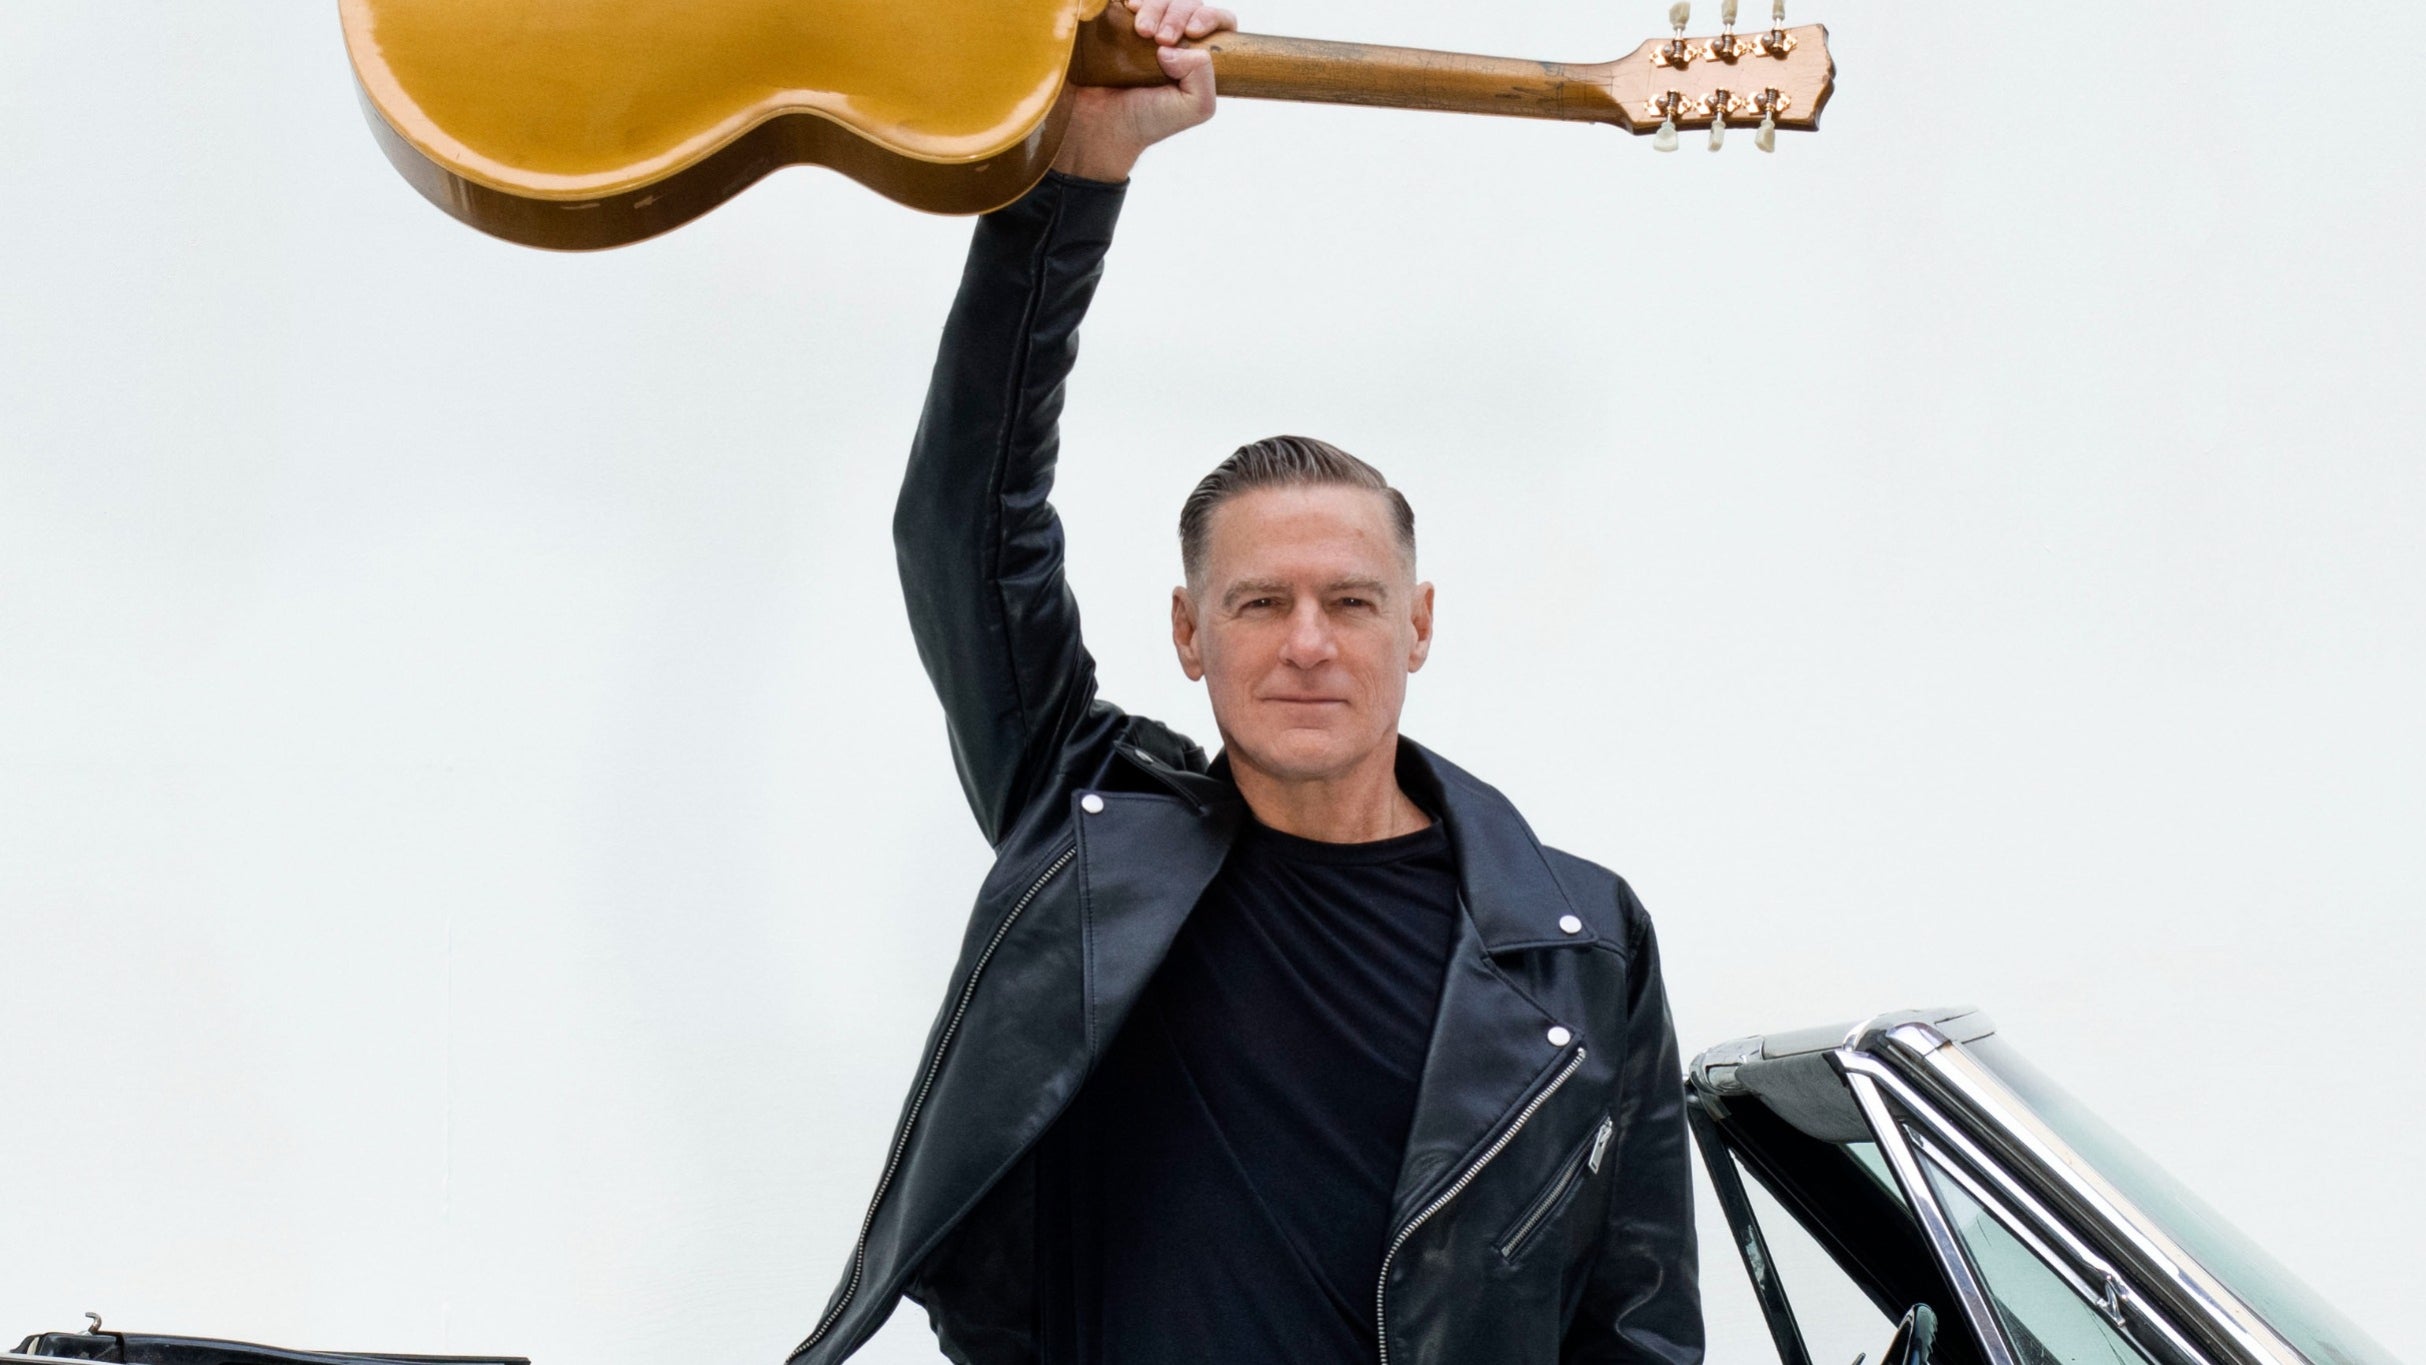 Bryan Adams: So Happy It Hurts w/ Eurythmics Songbook ft. Dave Stewart free presale code for performance tickets in El Paso, TX (Don Haskins Center)